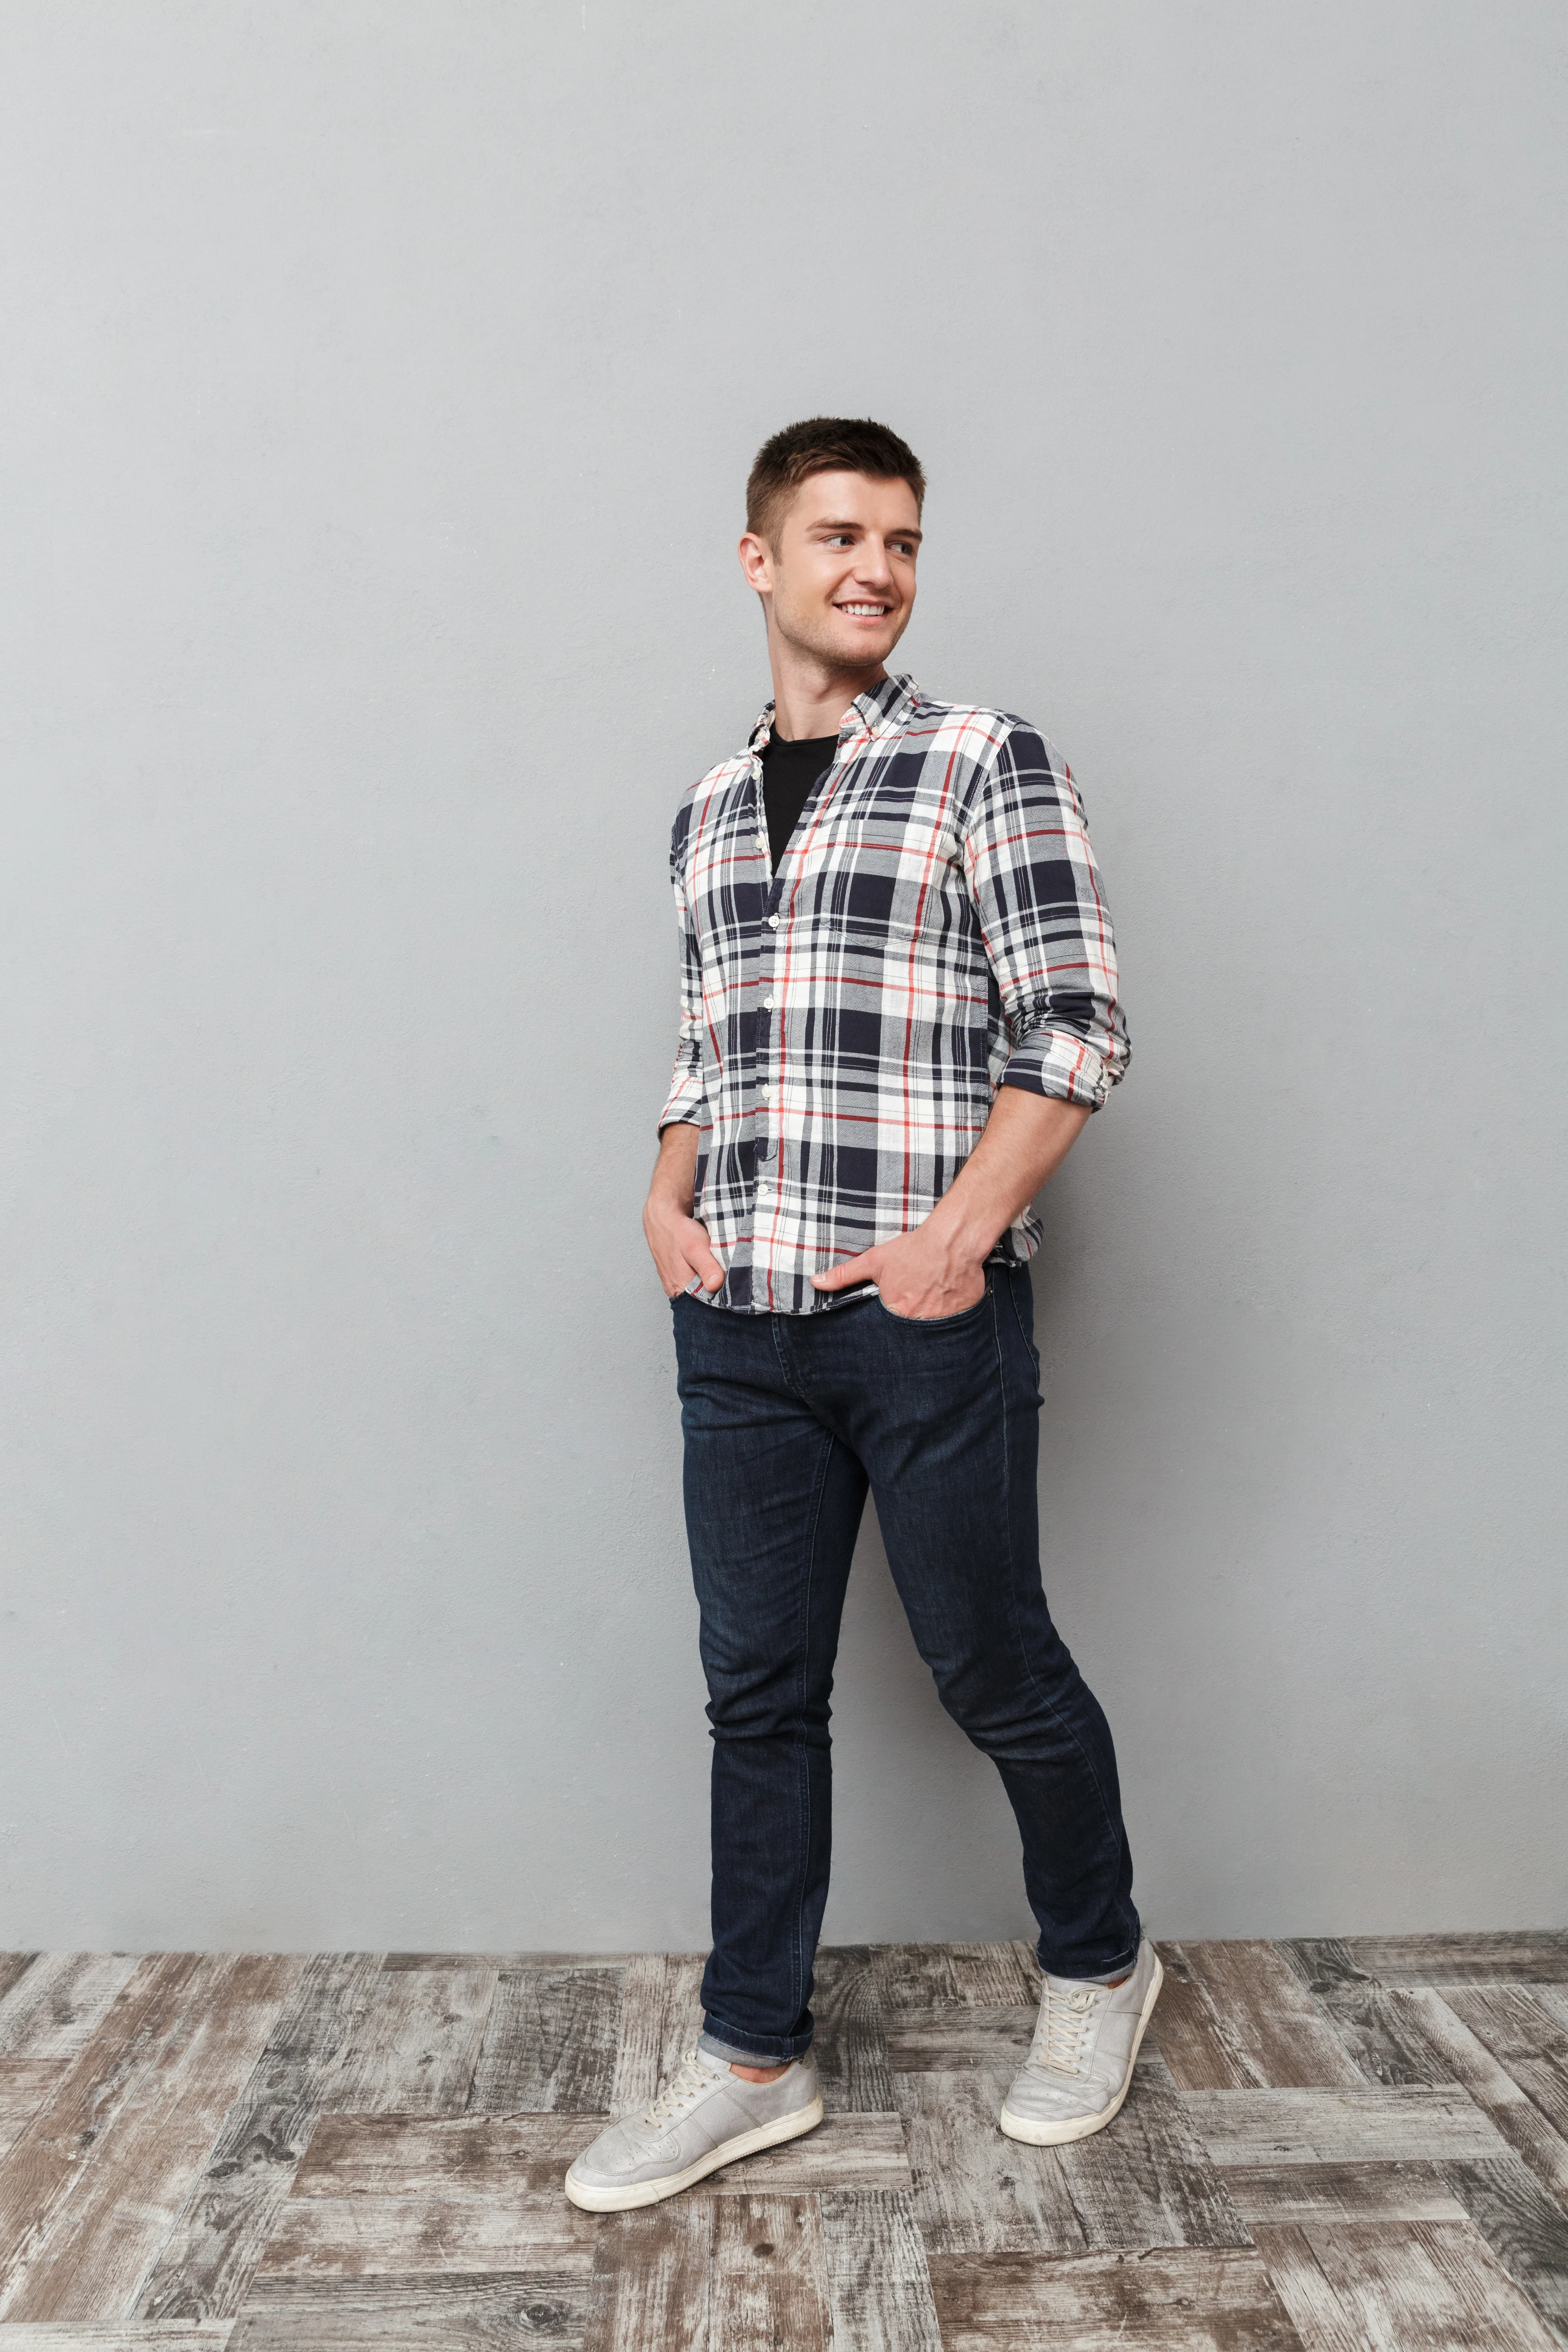 Portrait of a smiling young man in plaid shirt walking and looking away over gray background